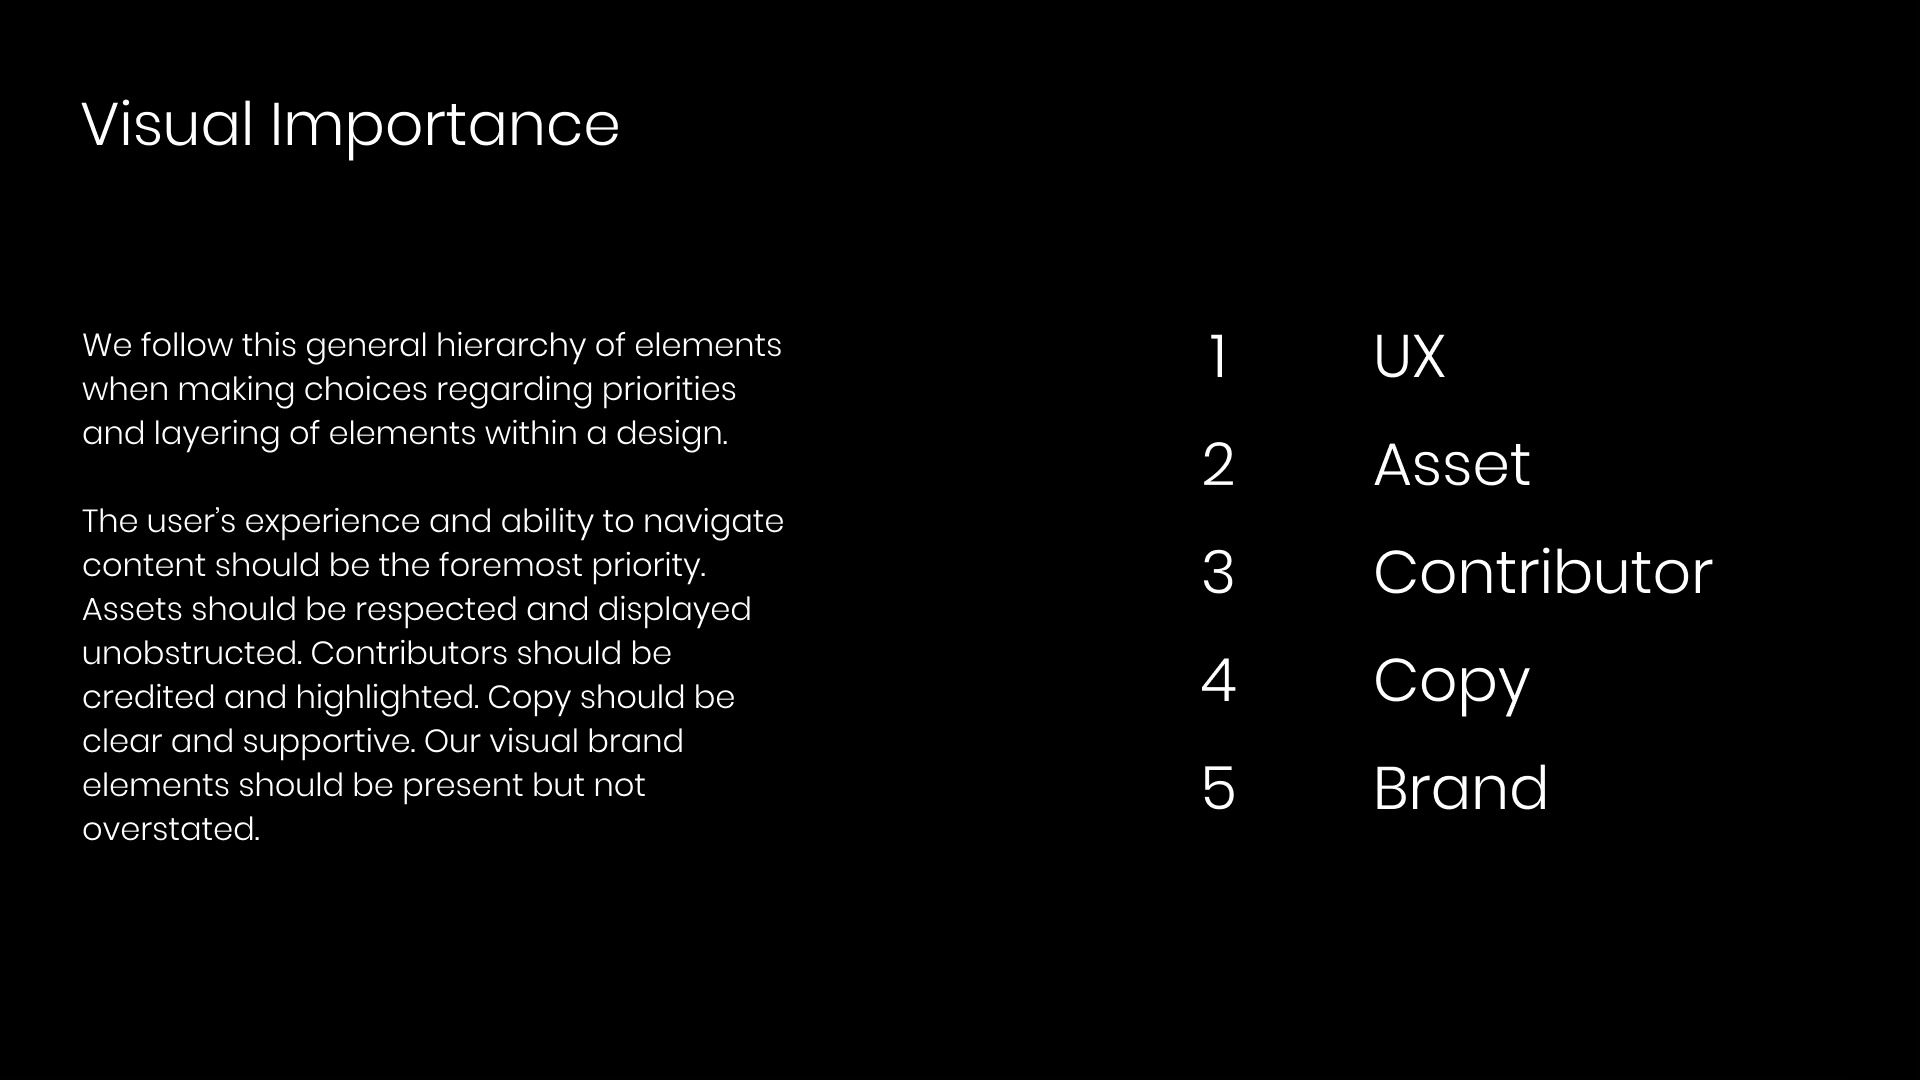 Visual Importance from Design Brief - UX, Asset, Contributor, Copy, Brand